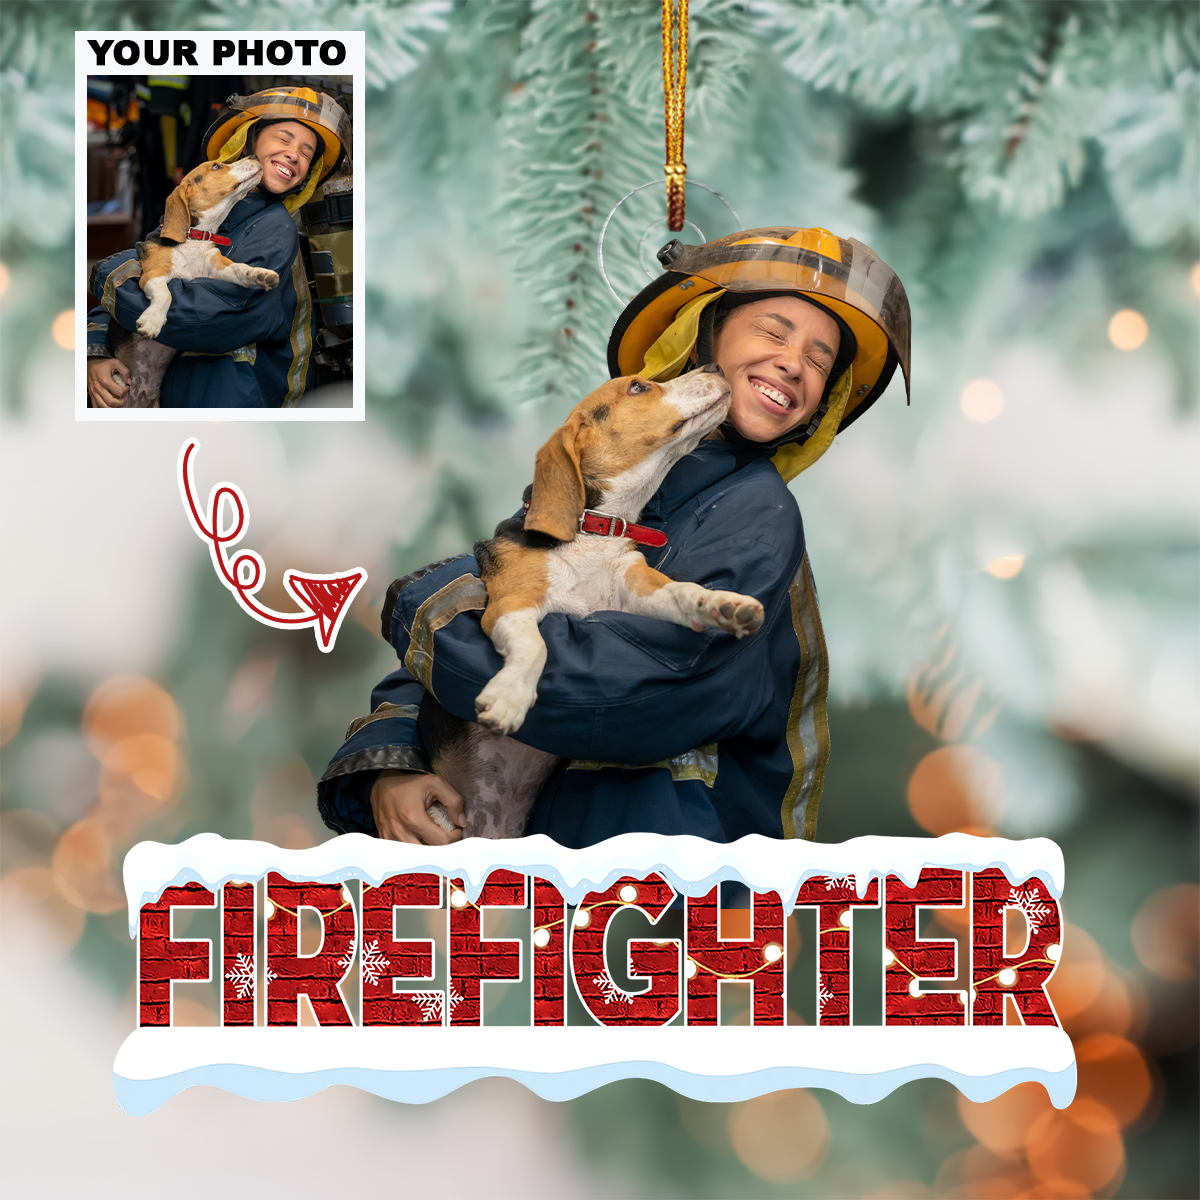 Firefighter Christmas Ornaments - Personalized Custom Photo Mica Ornament - Christmas Gift For Firefighter UPL0HT003